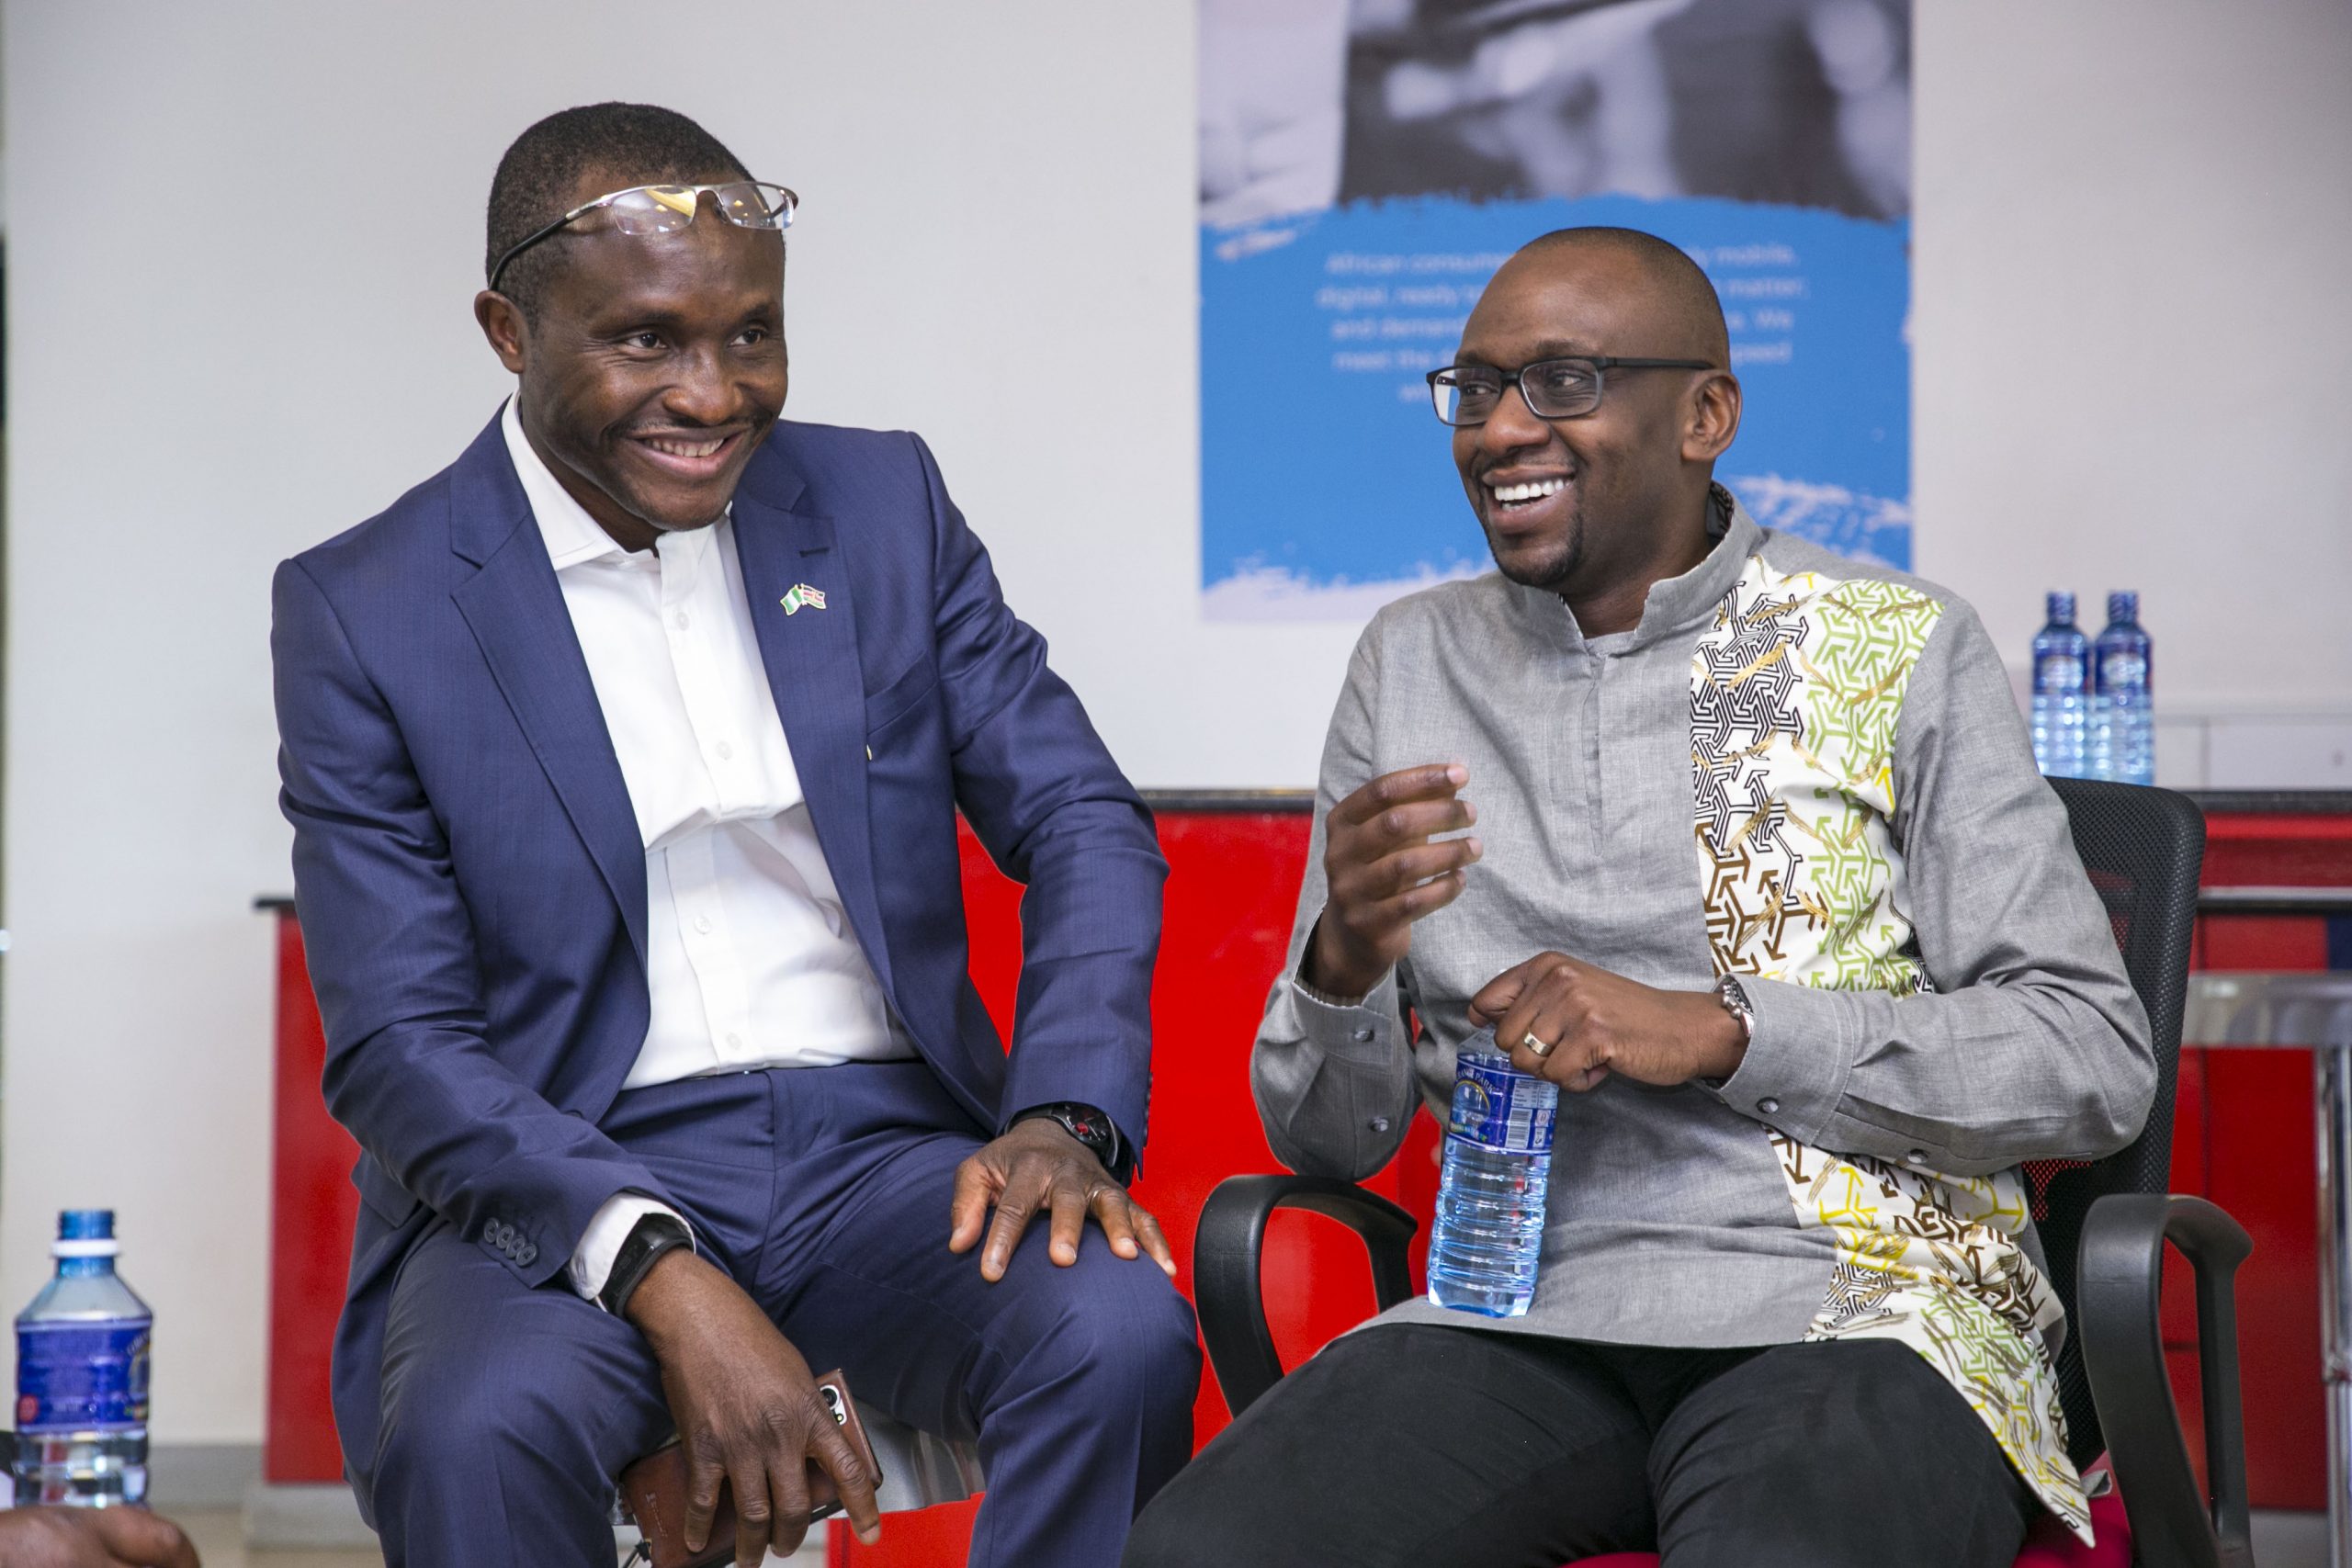 Cellulant Co-founders and Co-CEO, Bolaji Akinboro (left) and Ken Njoroge